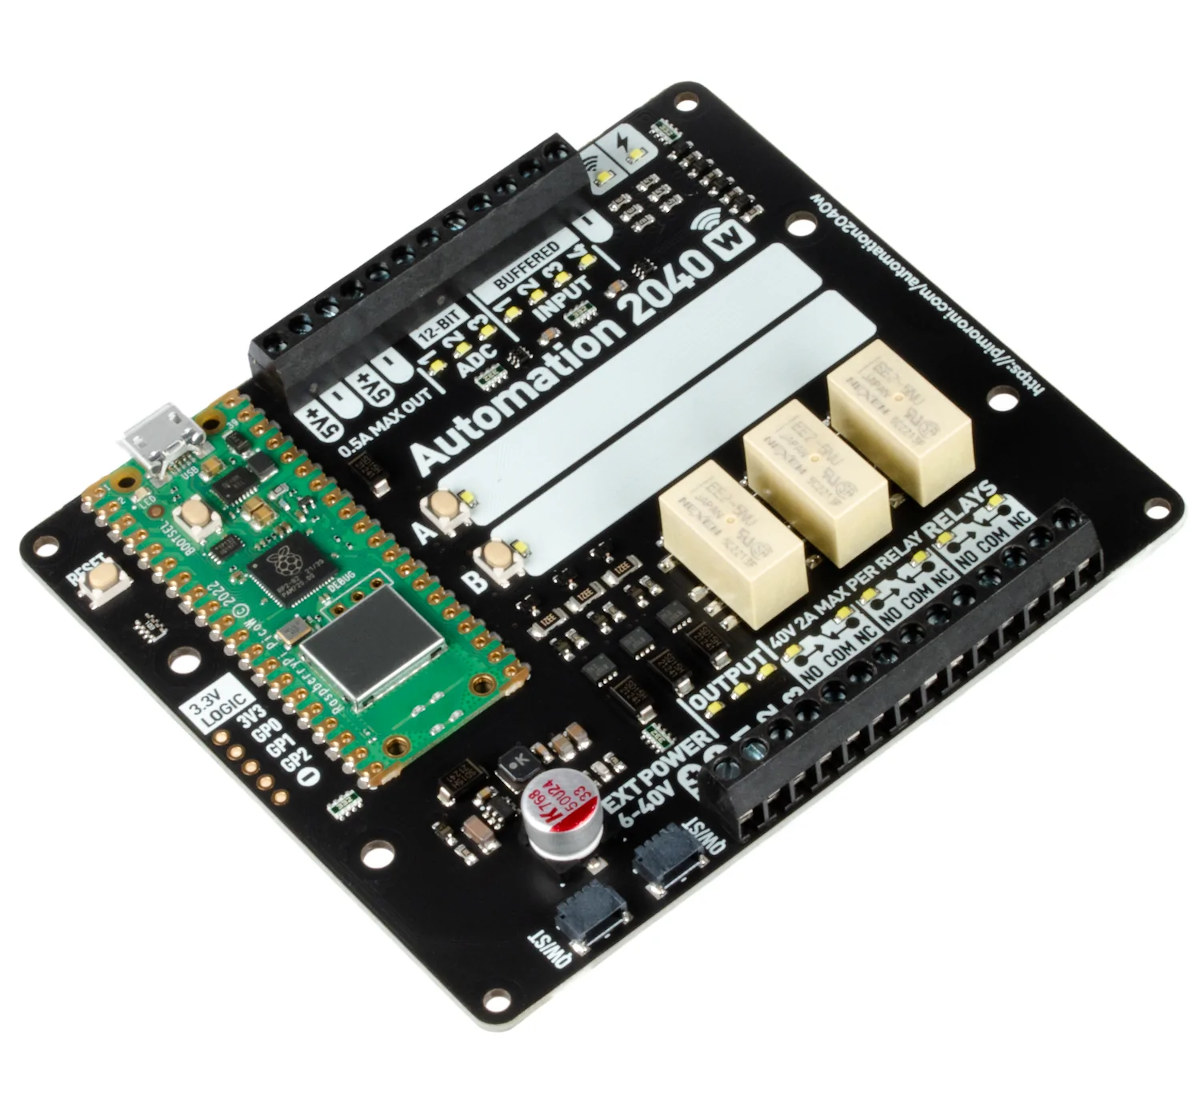 automation-2040-w-board-supports-6v-to-40v-i-os-ships-with-raspberry-pi-pico-w-cnx-software